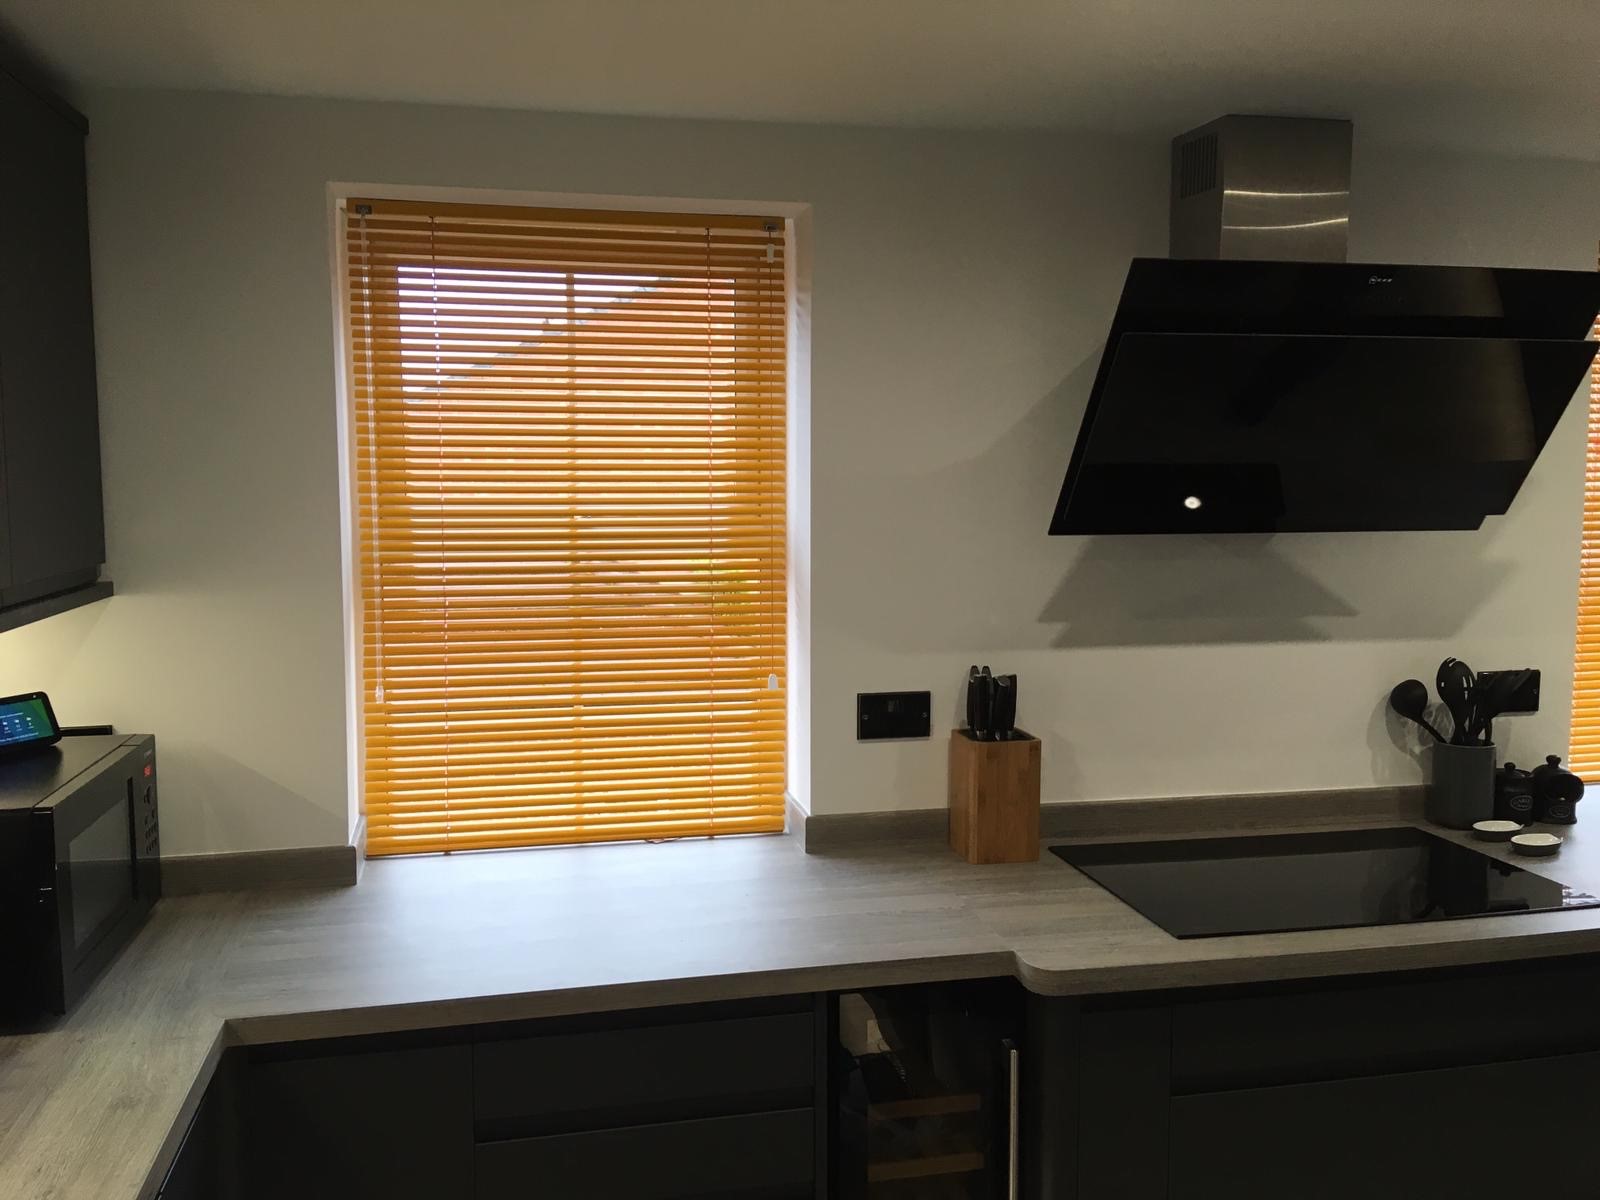 Suppliers of Aluminium Blinds For Kitchens UK